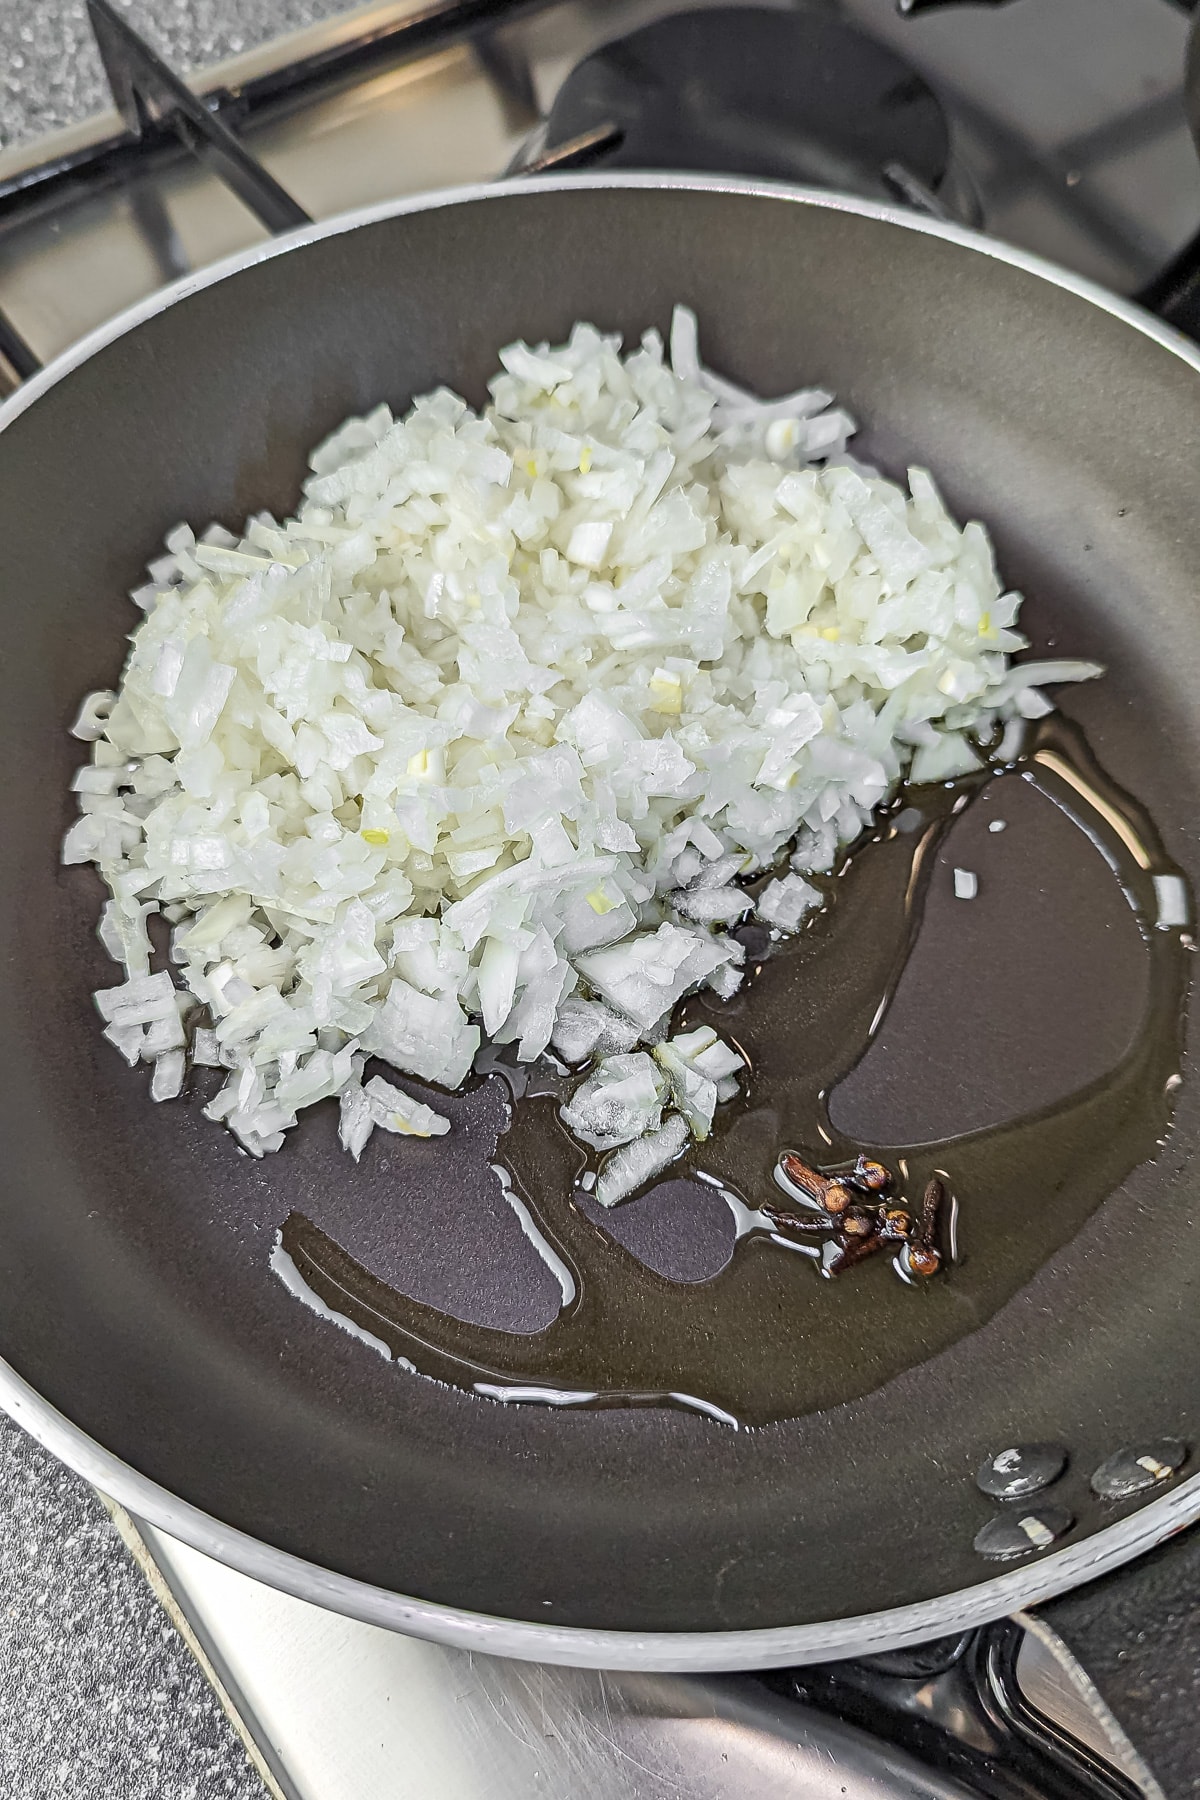 Diced onions and whole cloves of garlic sautéing in oil in a non-stick frying pan, the first step in preparing a savory dish.